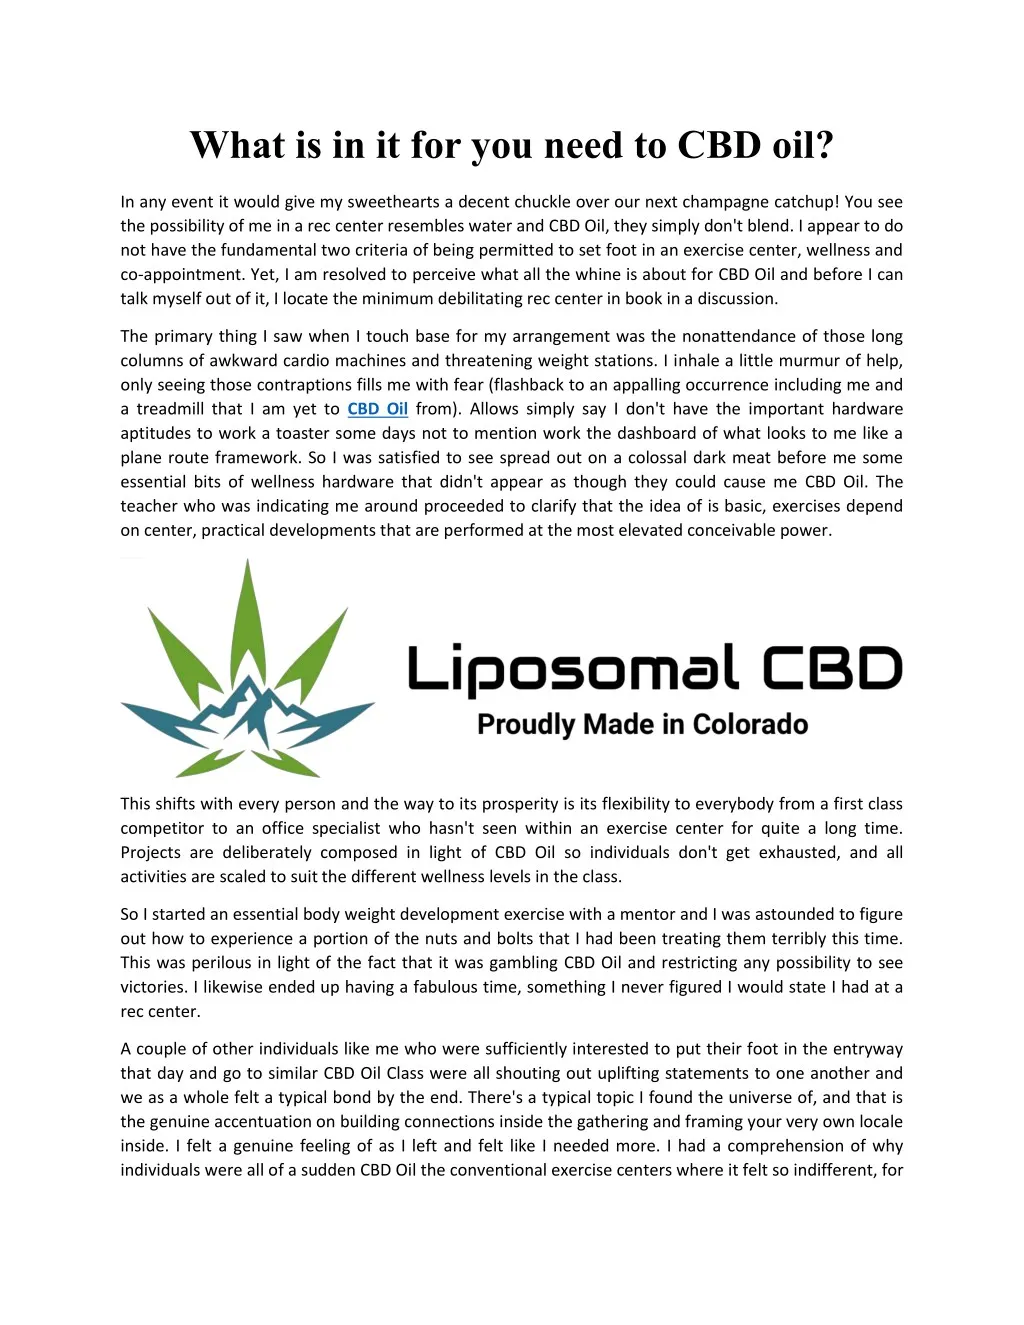 what is in it for you need to cbd oil